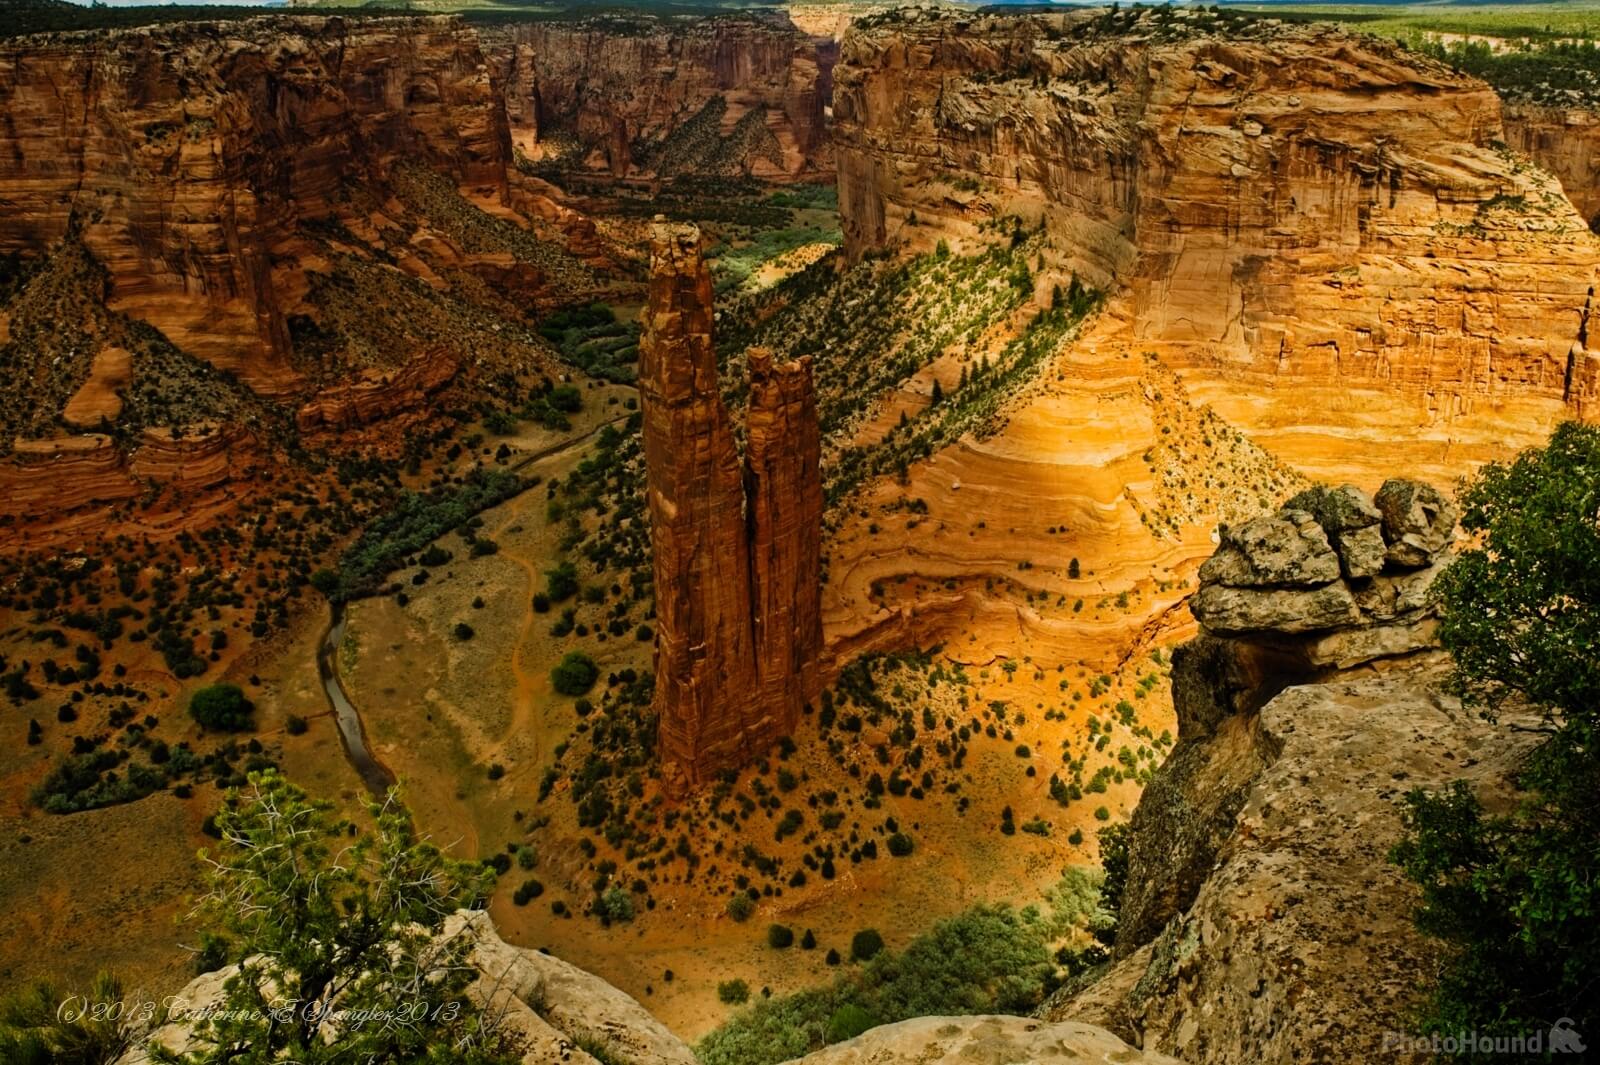 Image of Spider Rock Overlook by Cathe Spangler